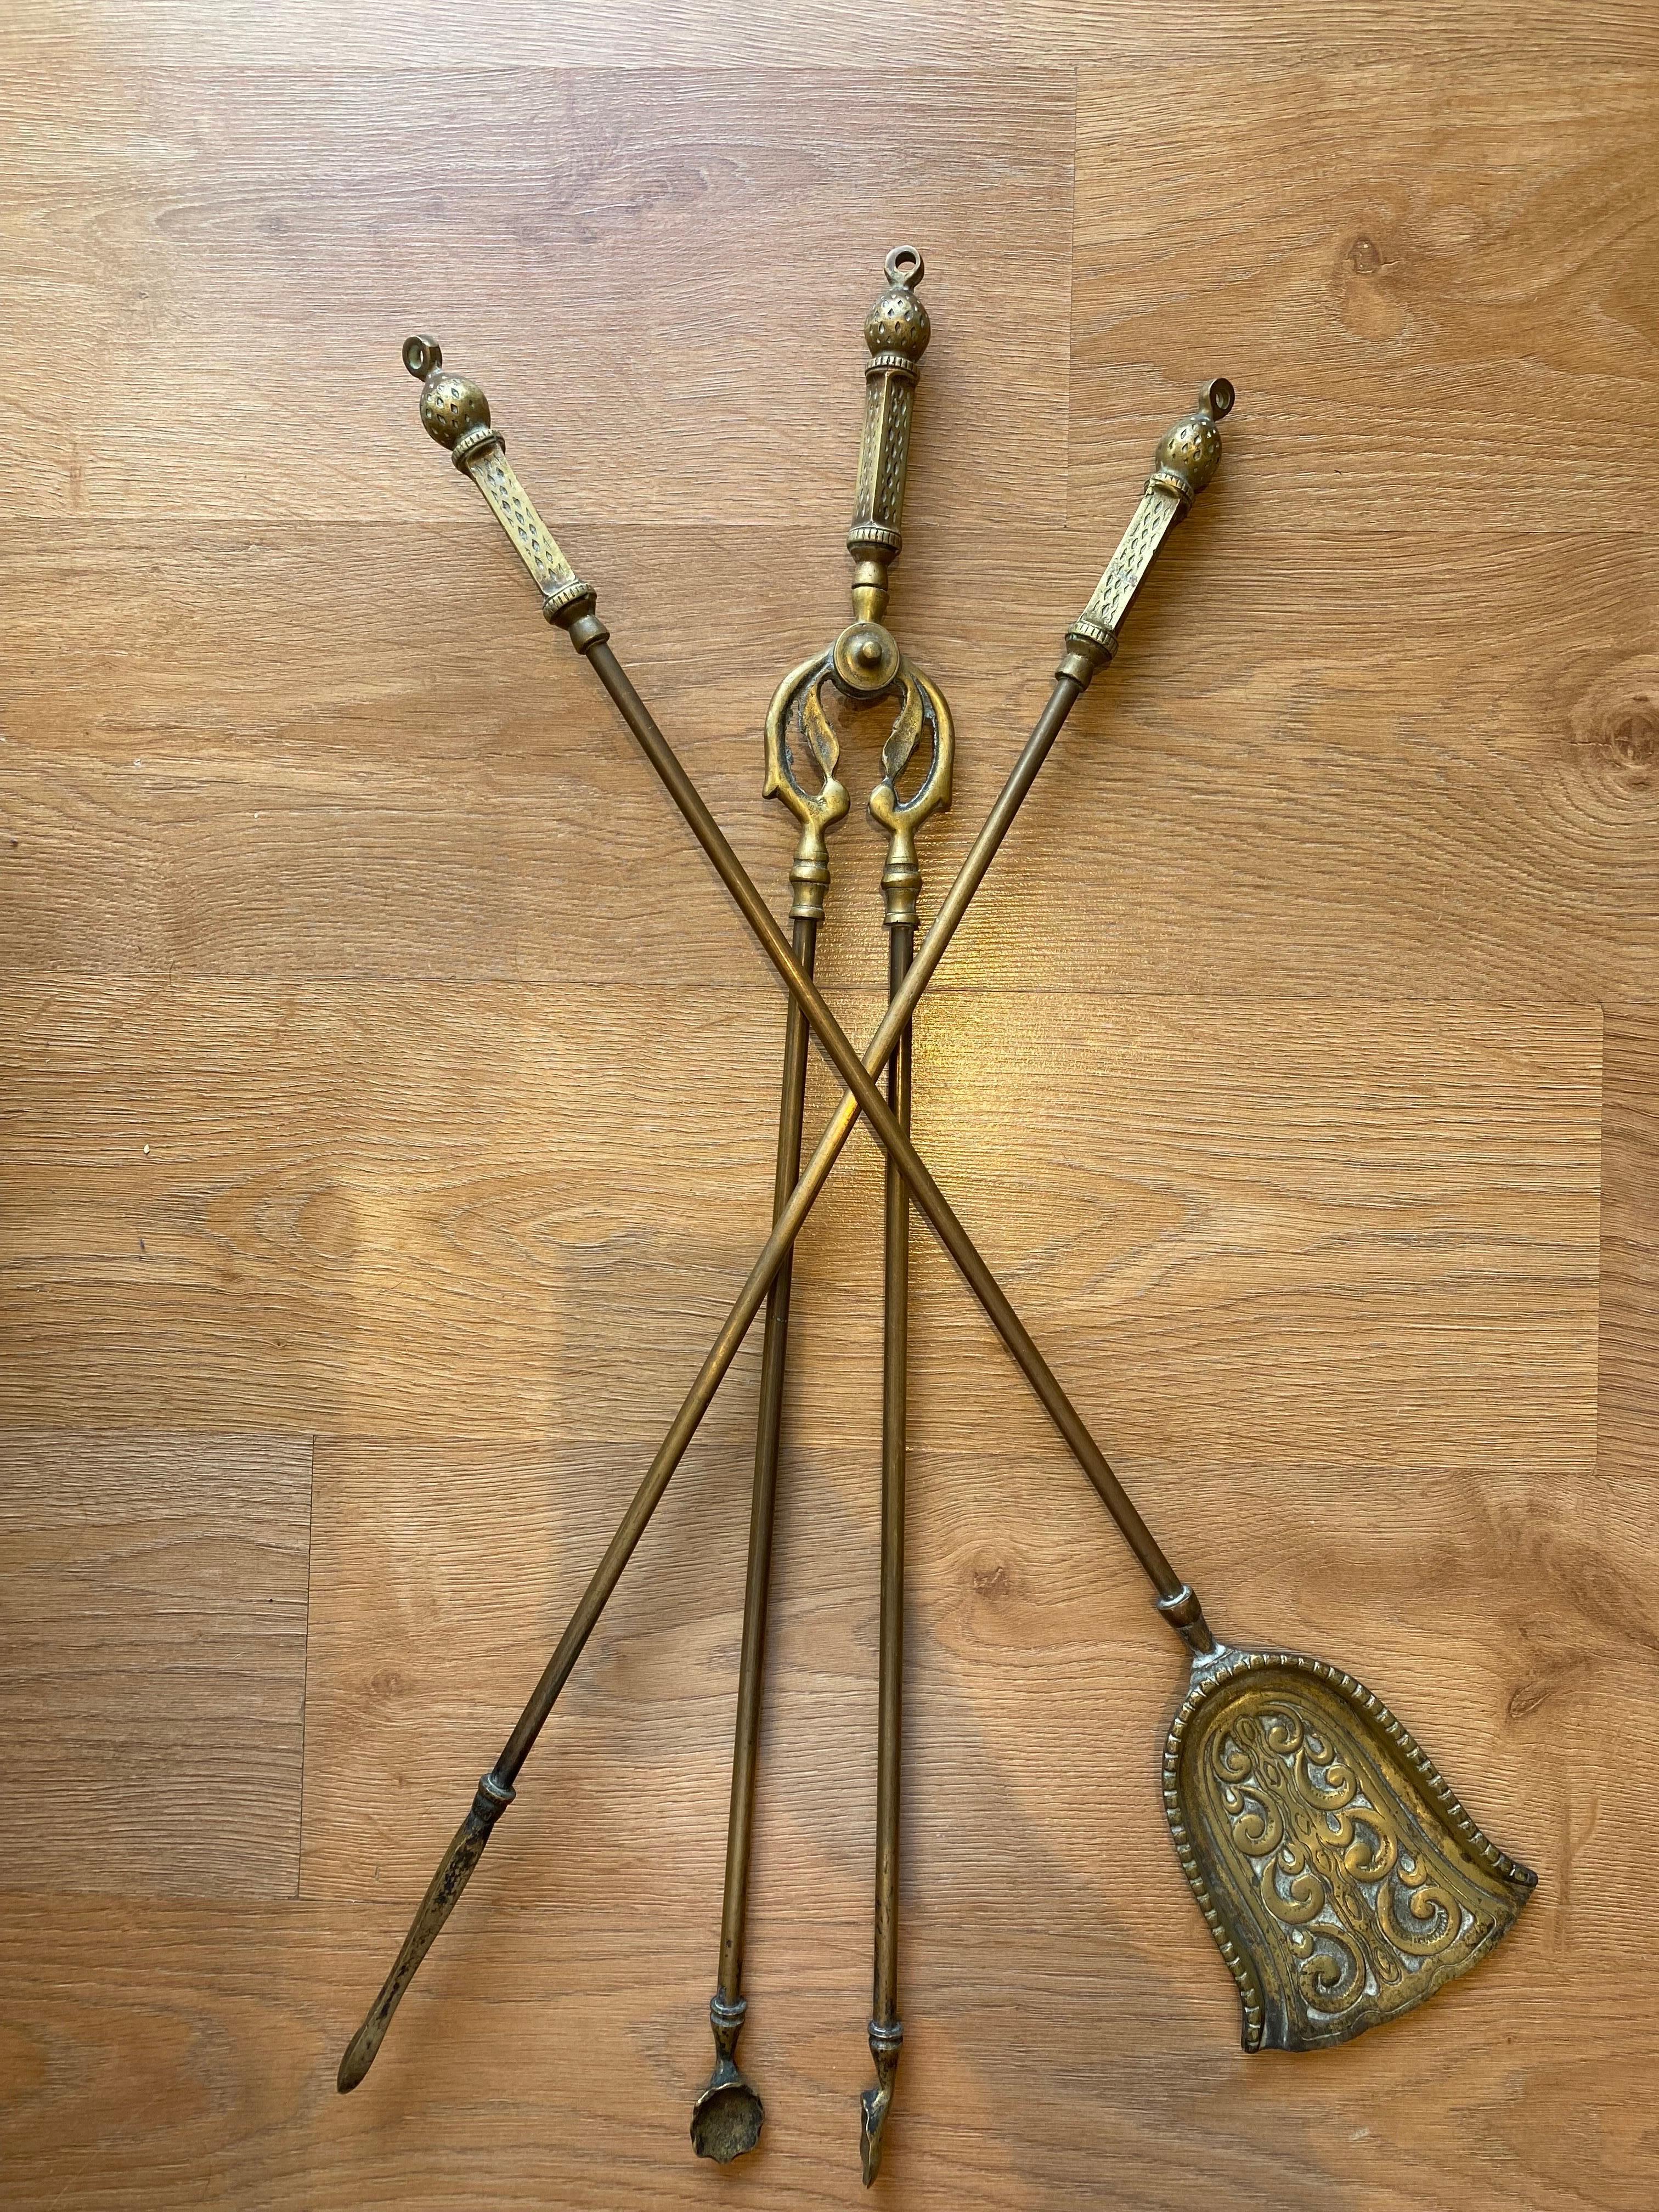 A stunning antique Victorian brass fire companion set. The superb set is solid brass, with beautiful ball motif. with matching the elegant yet powerful impression the set provides. This is truly a remarkable set, with fantastic craftsmanship. A